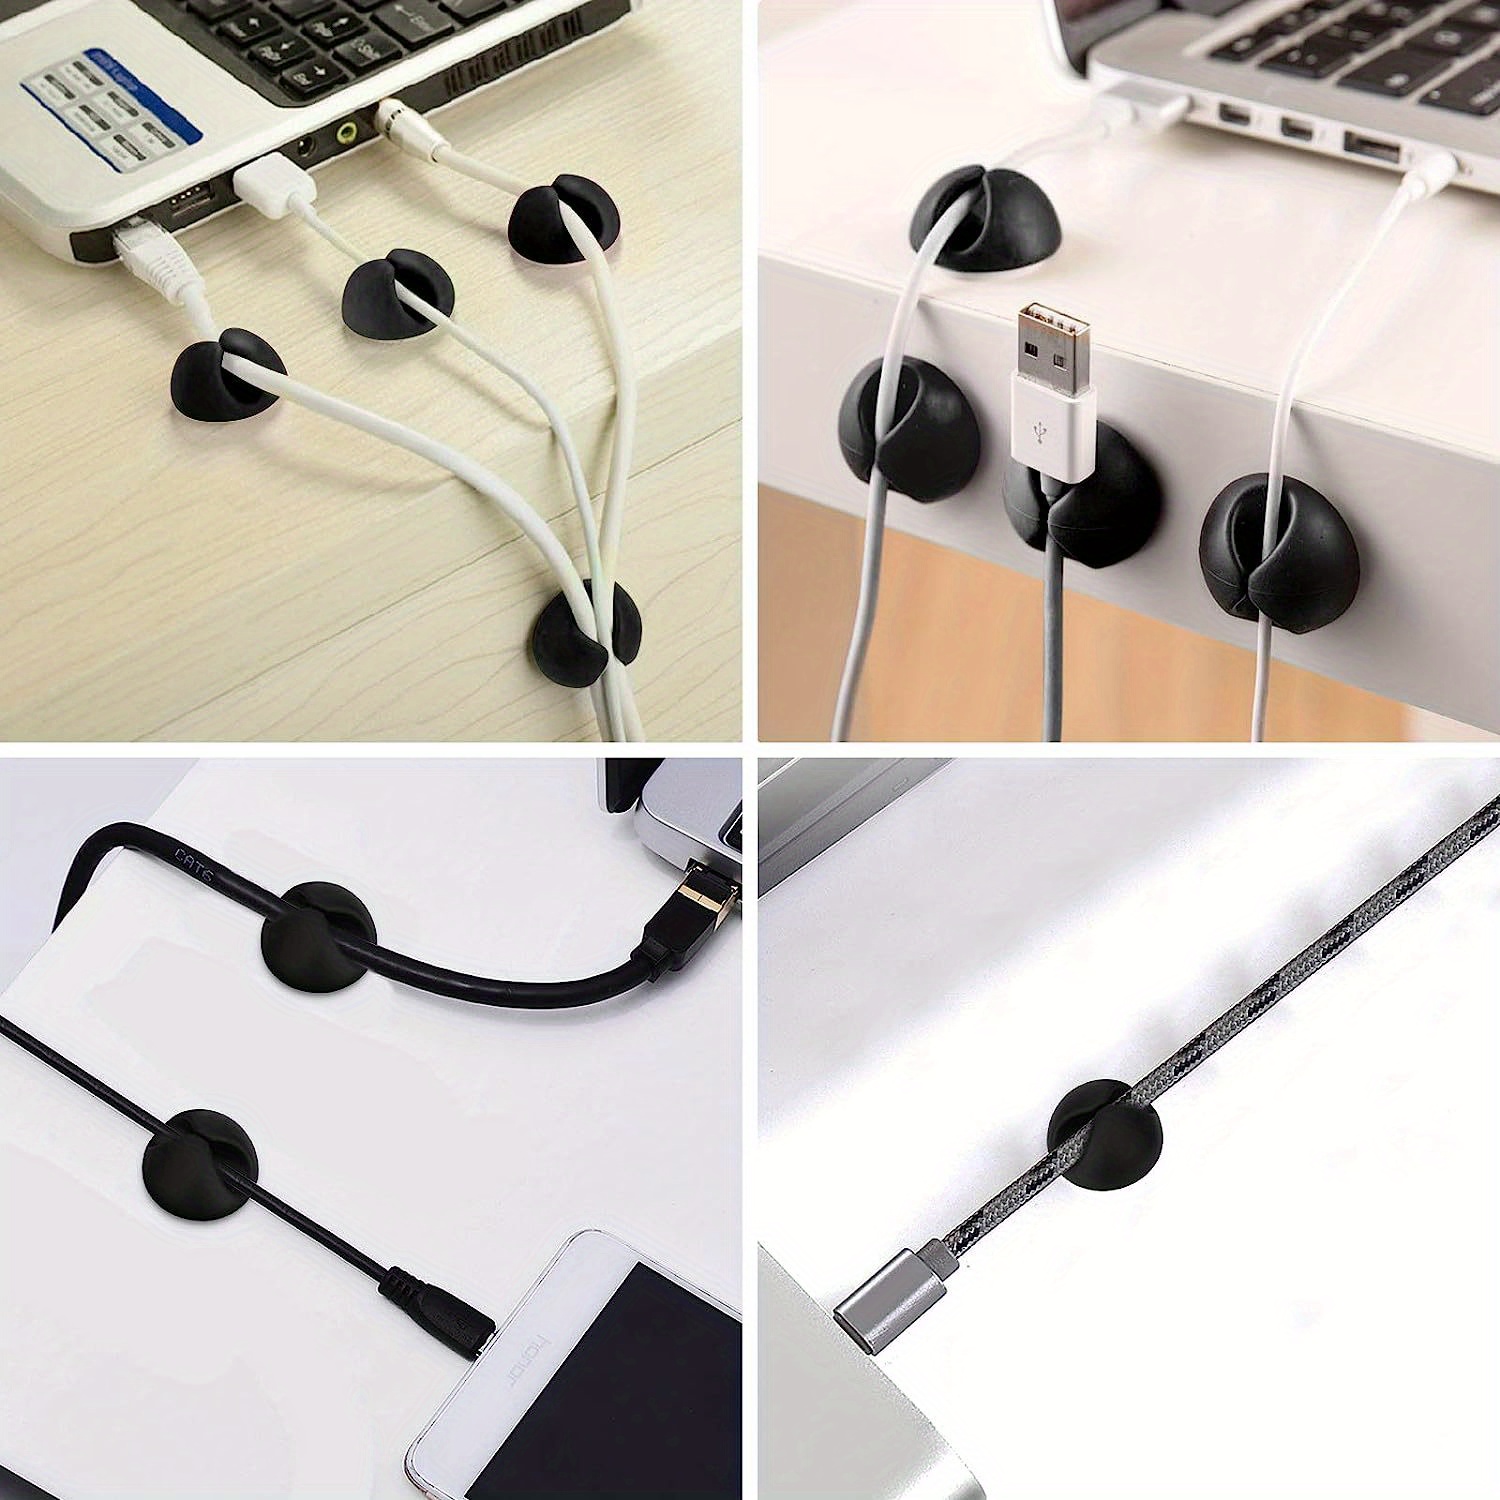 XINCA Adhesive Cable Clips Sticky Tack Cord Holder Wire Organizer